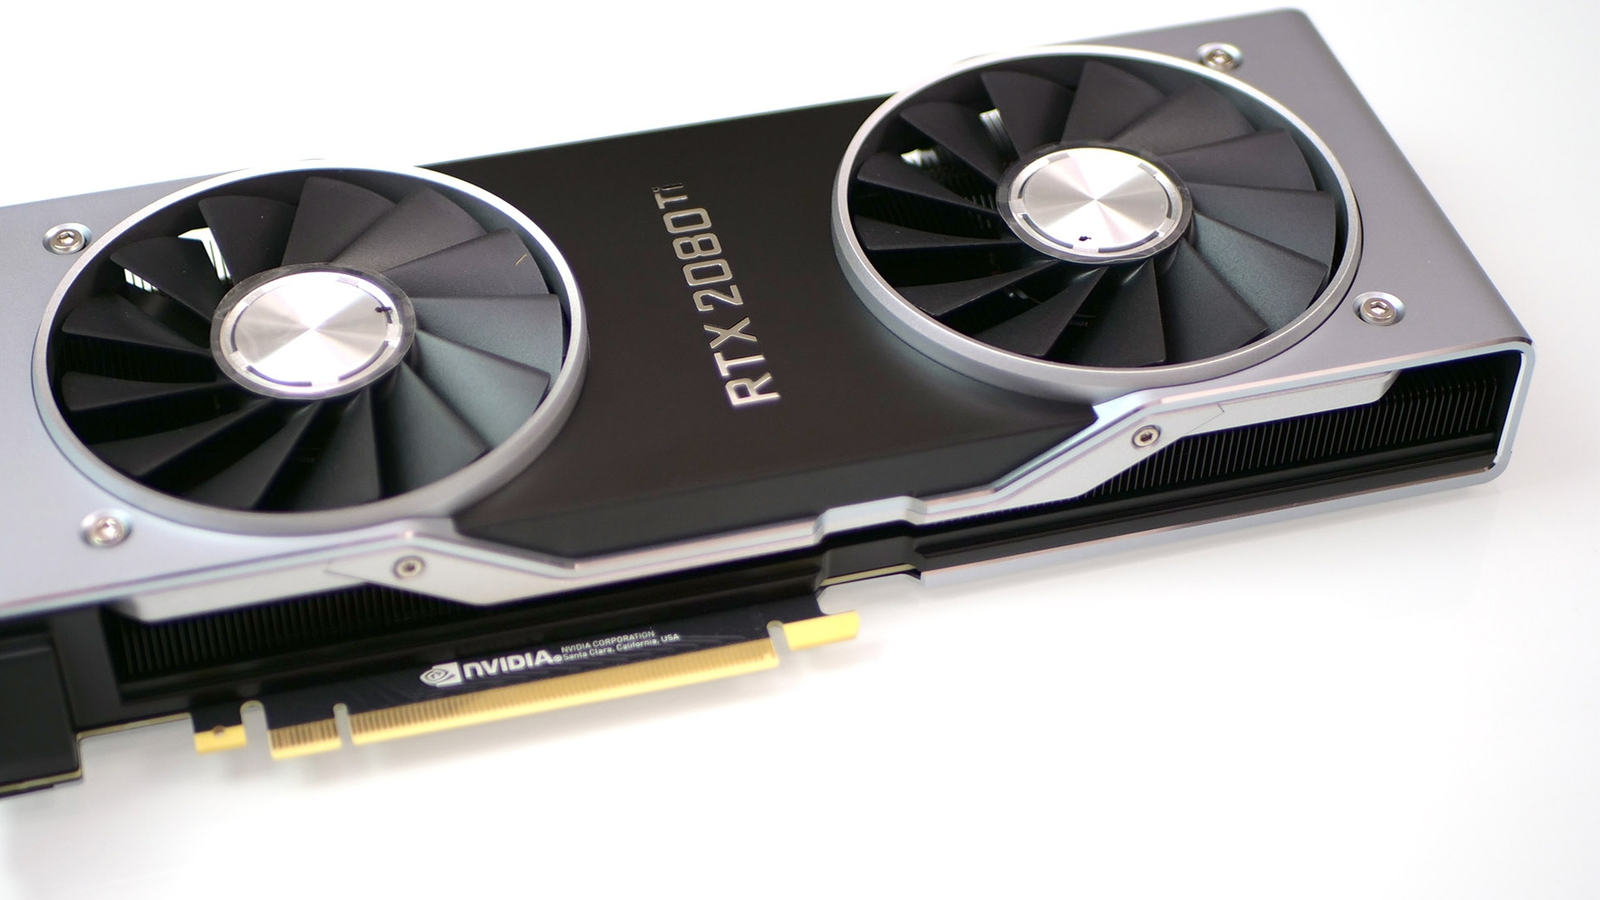 Nvidia releases first RTX 2080 4K benchmark results